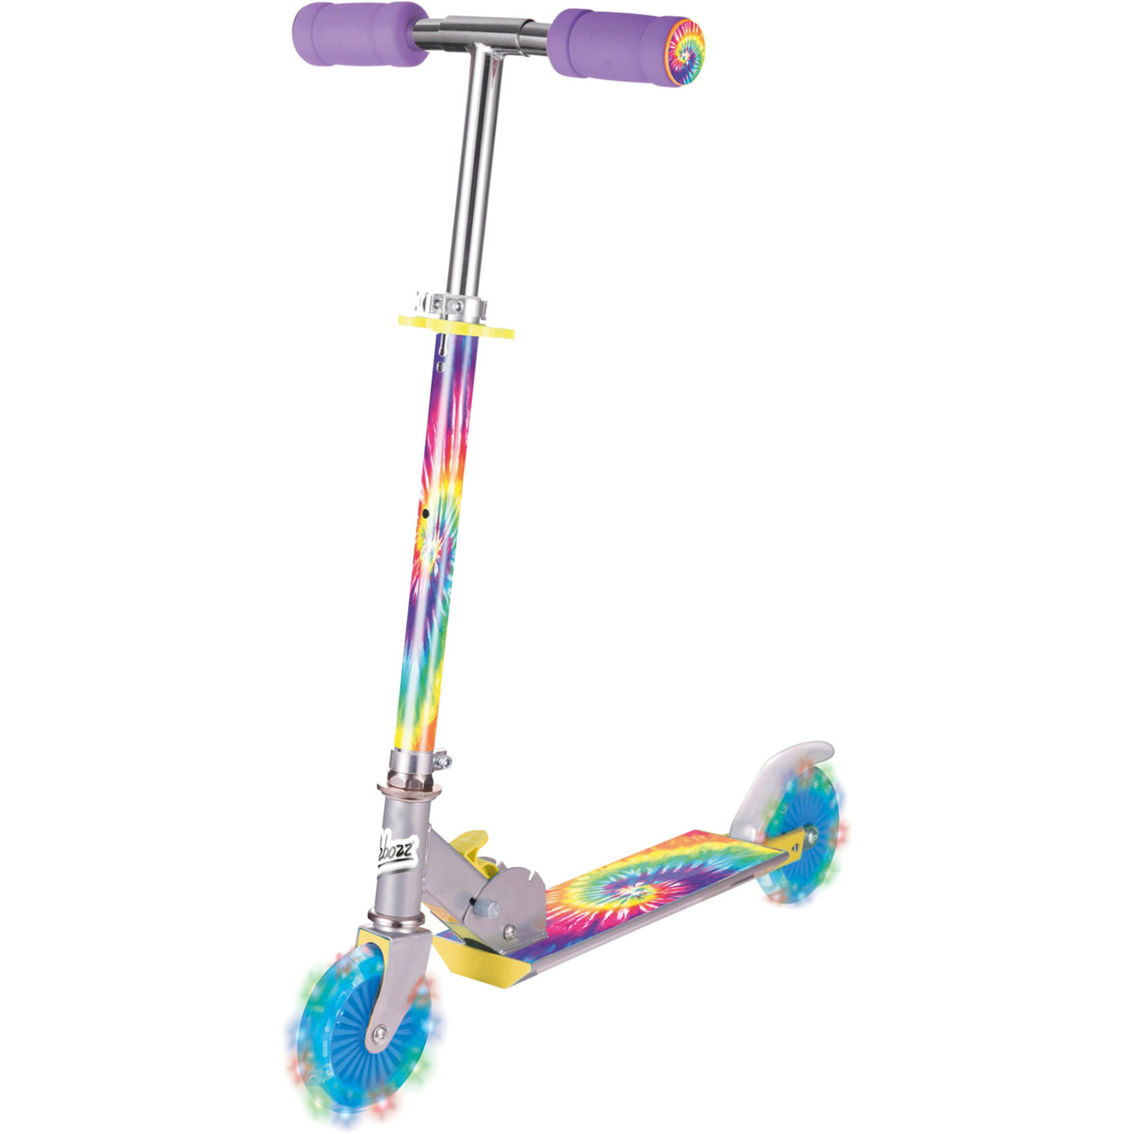 Tie Dye Scooter with Flashing Wheels - Image 2 of 5